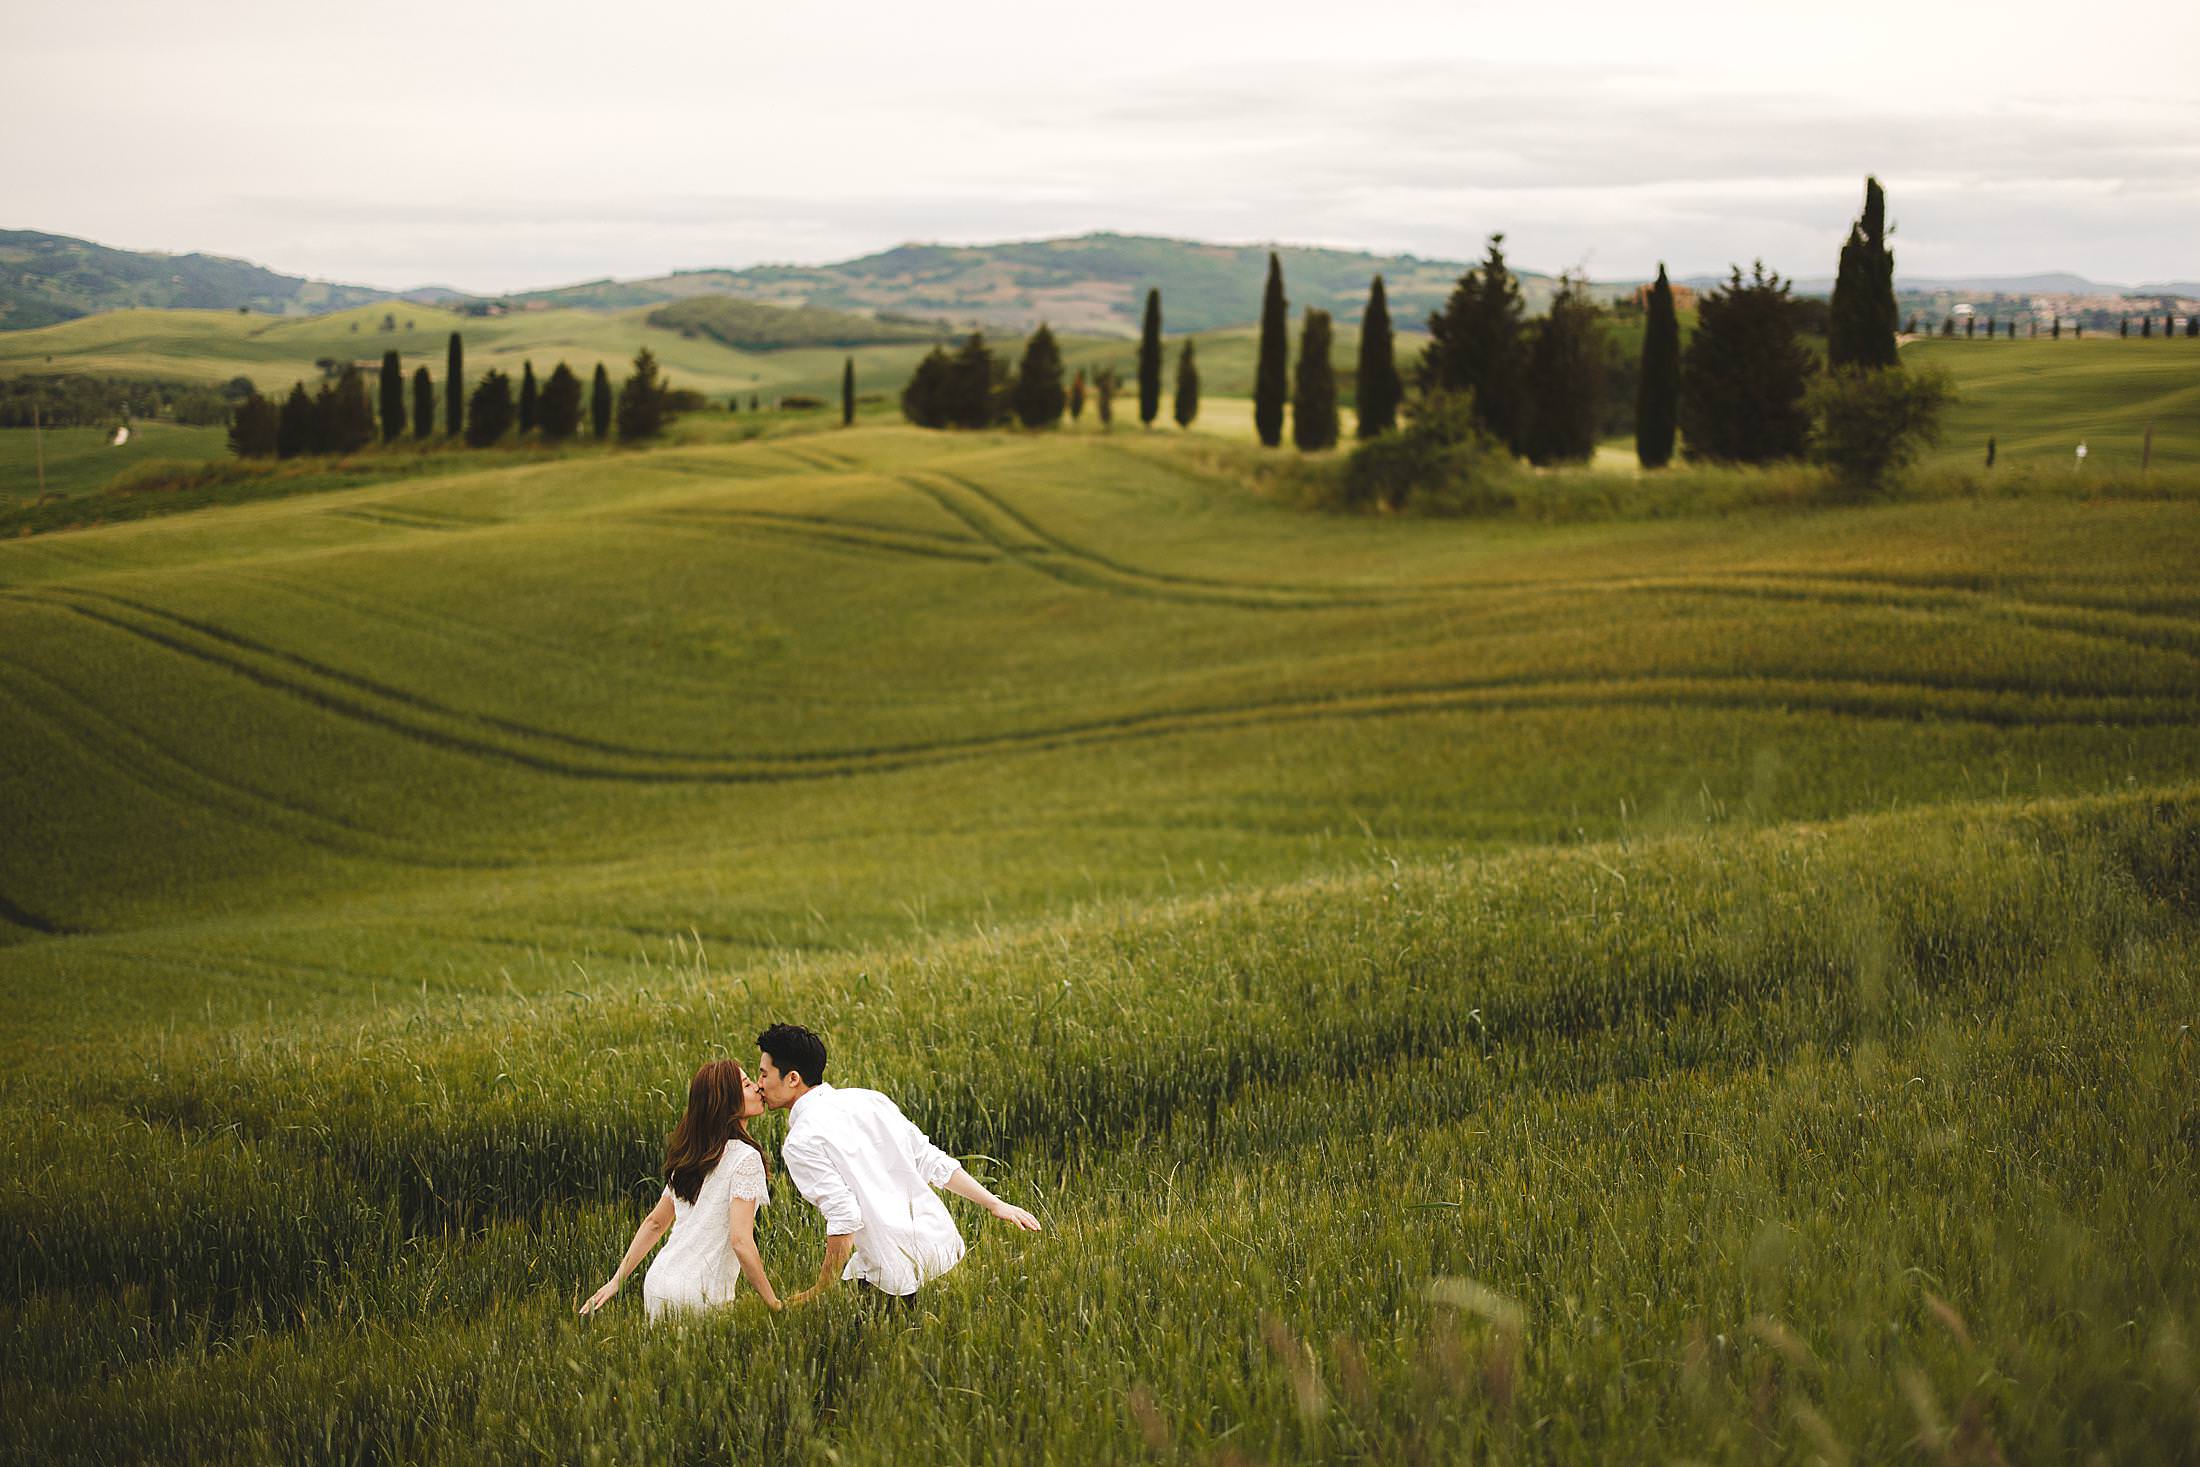 Dreaming pre-wedding photo shoot in a landscape adorned in vibrant shades of green in the heart of Val d’Orcia near Pienza